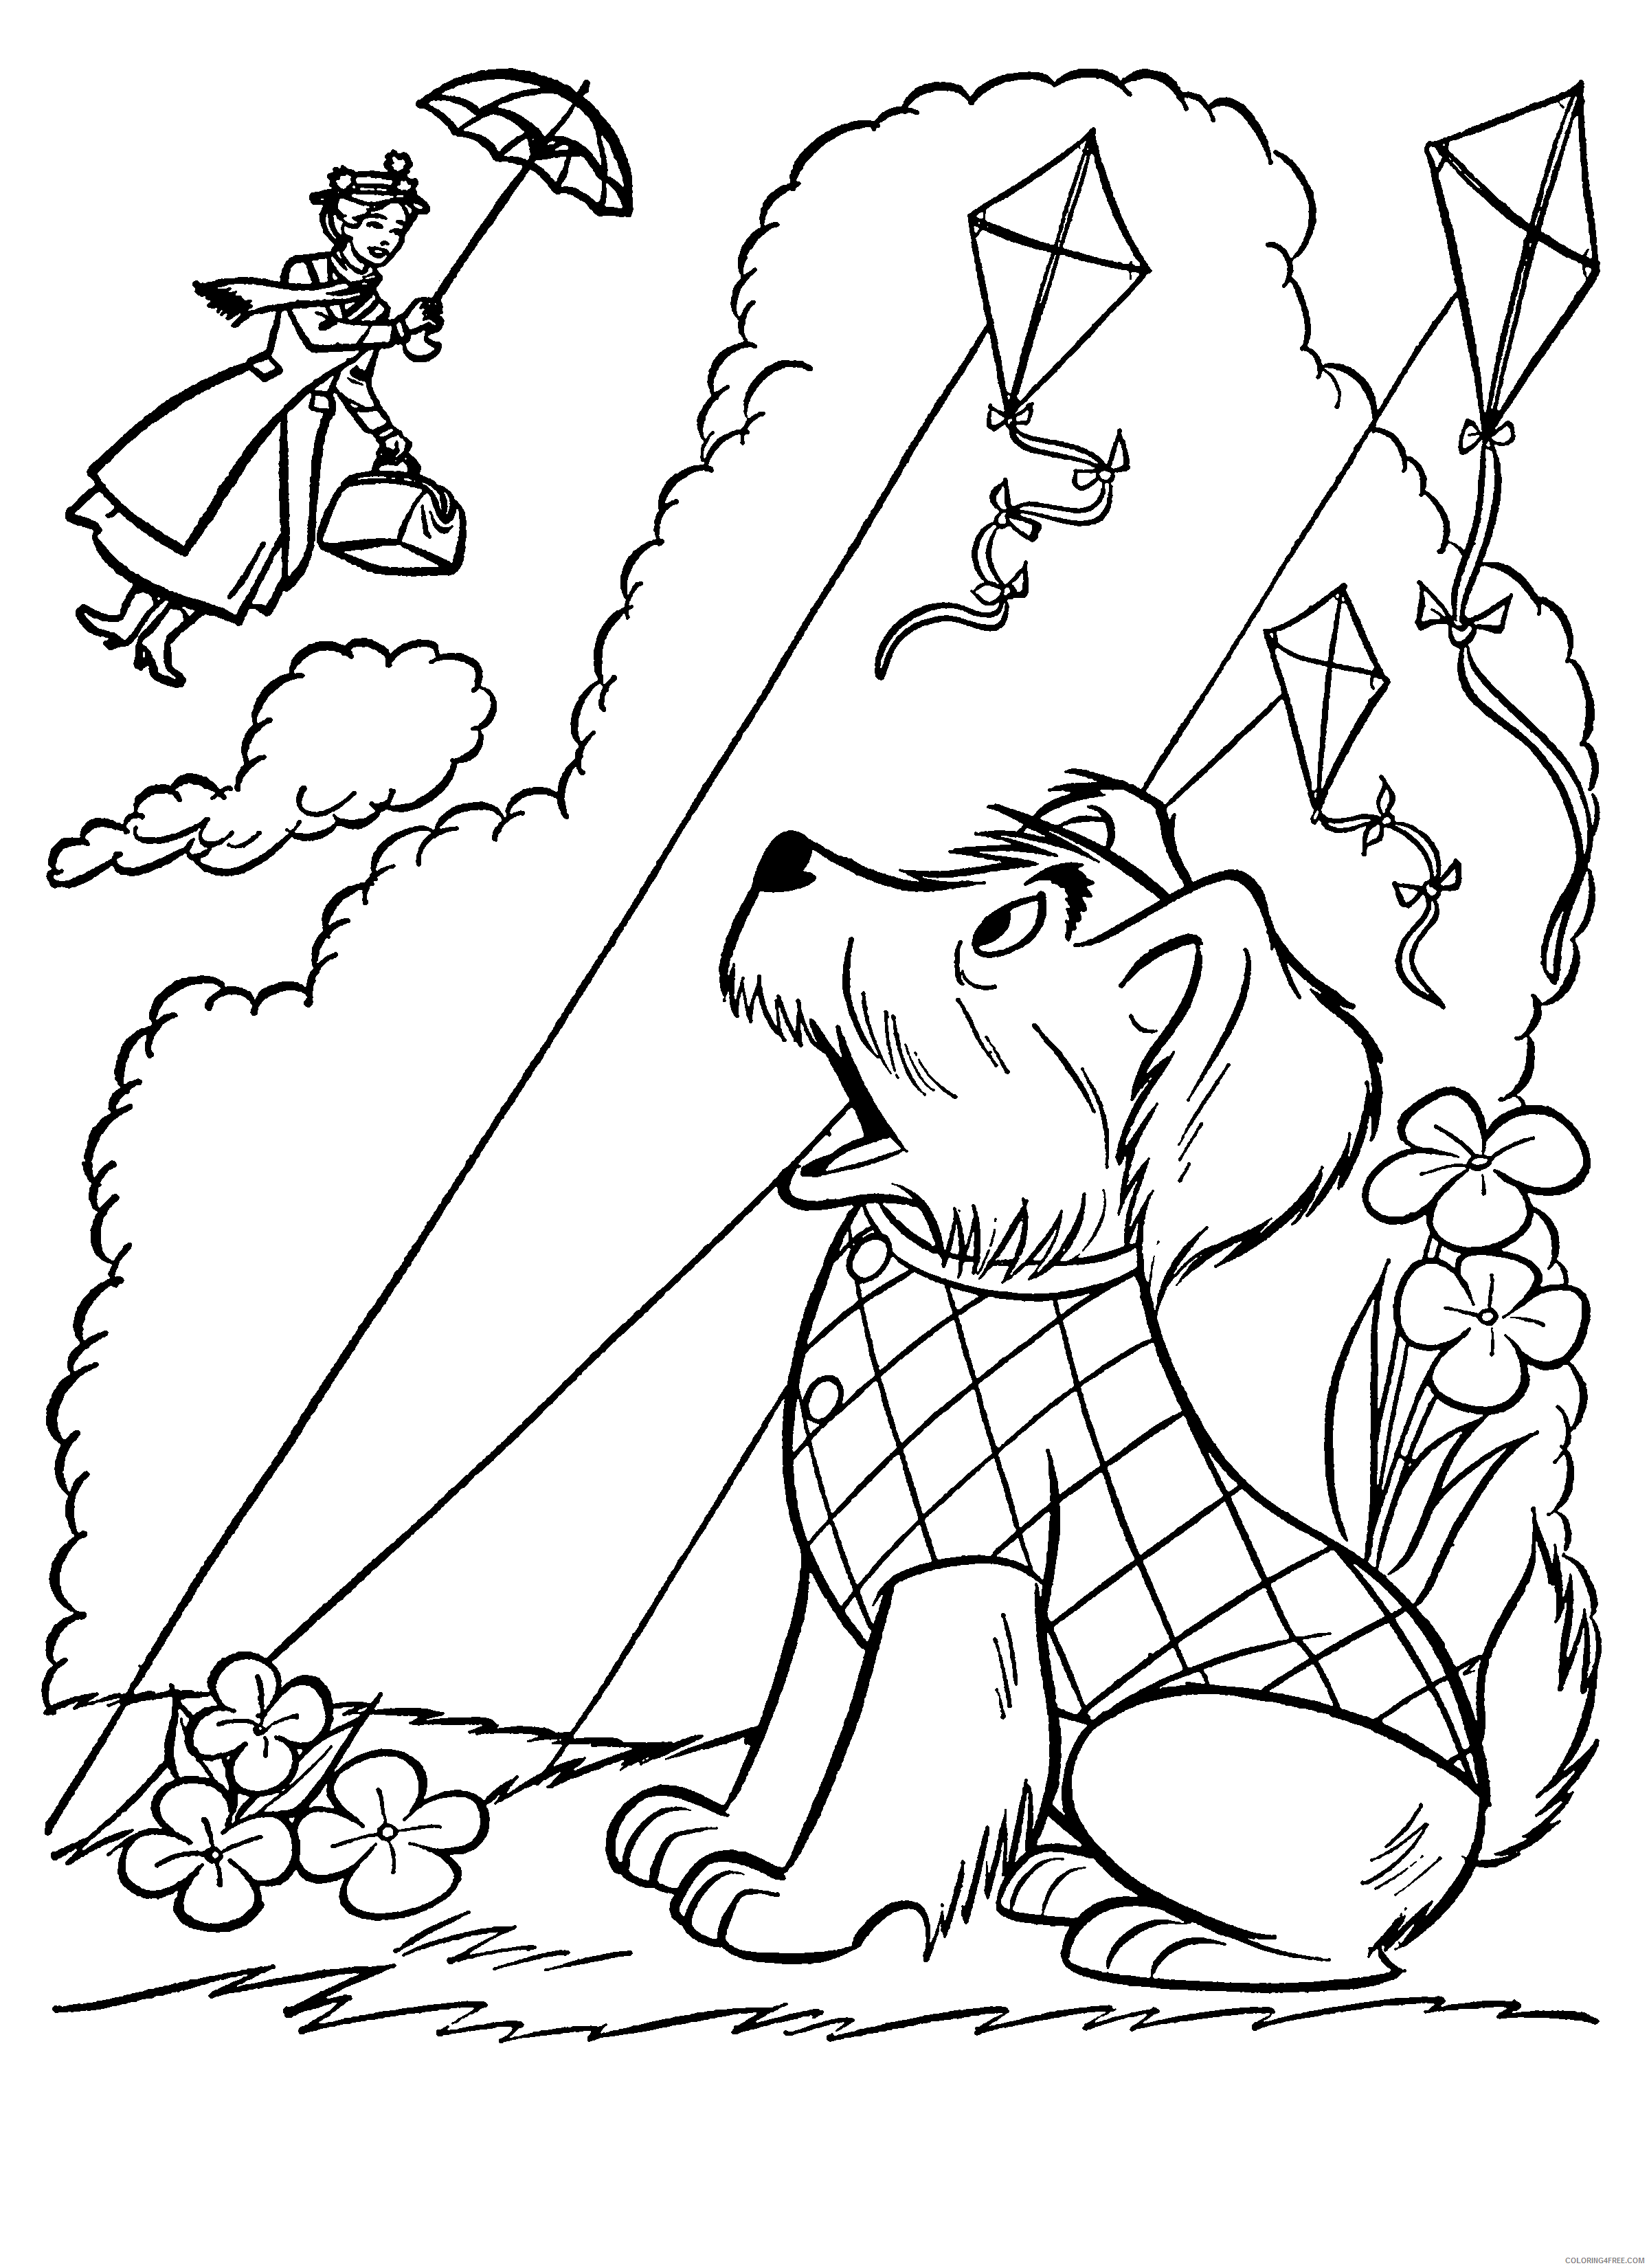 Dogs Coloring Pages Animal Printable Sheets Mary Poppins Dog 2021 1611 Coloring4free